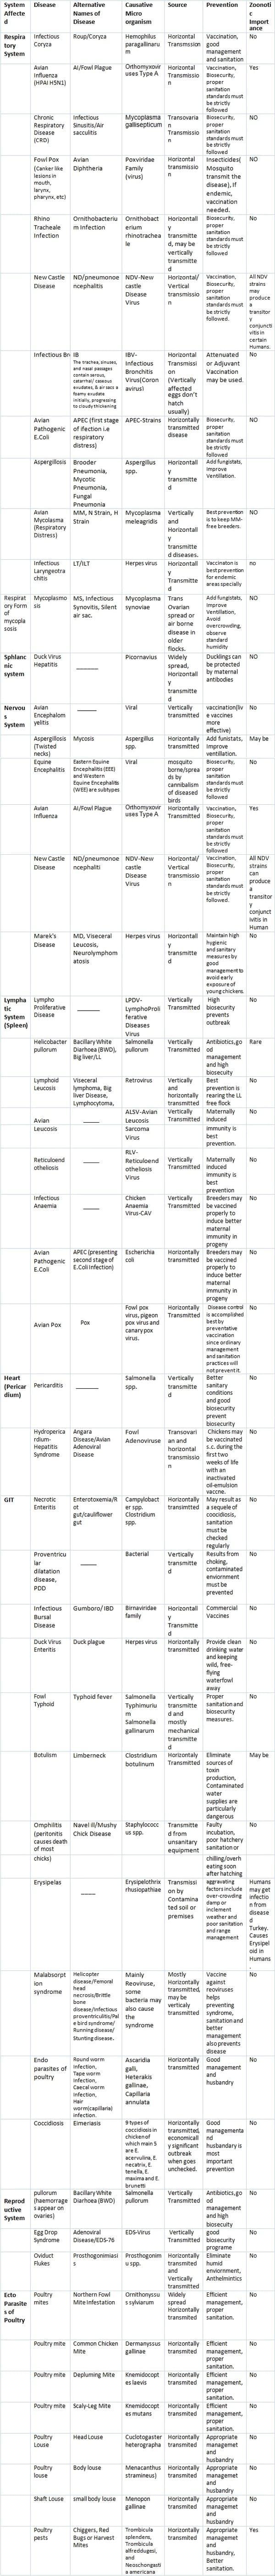 Major Vertically And Horizontally Transmitted Diseases In Poultry - Image 2